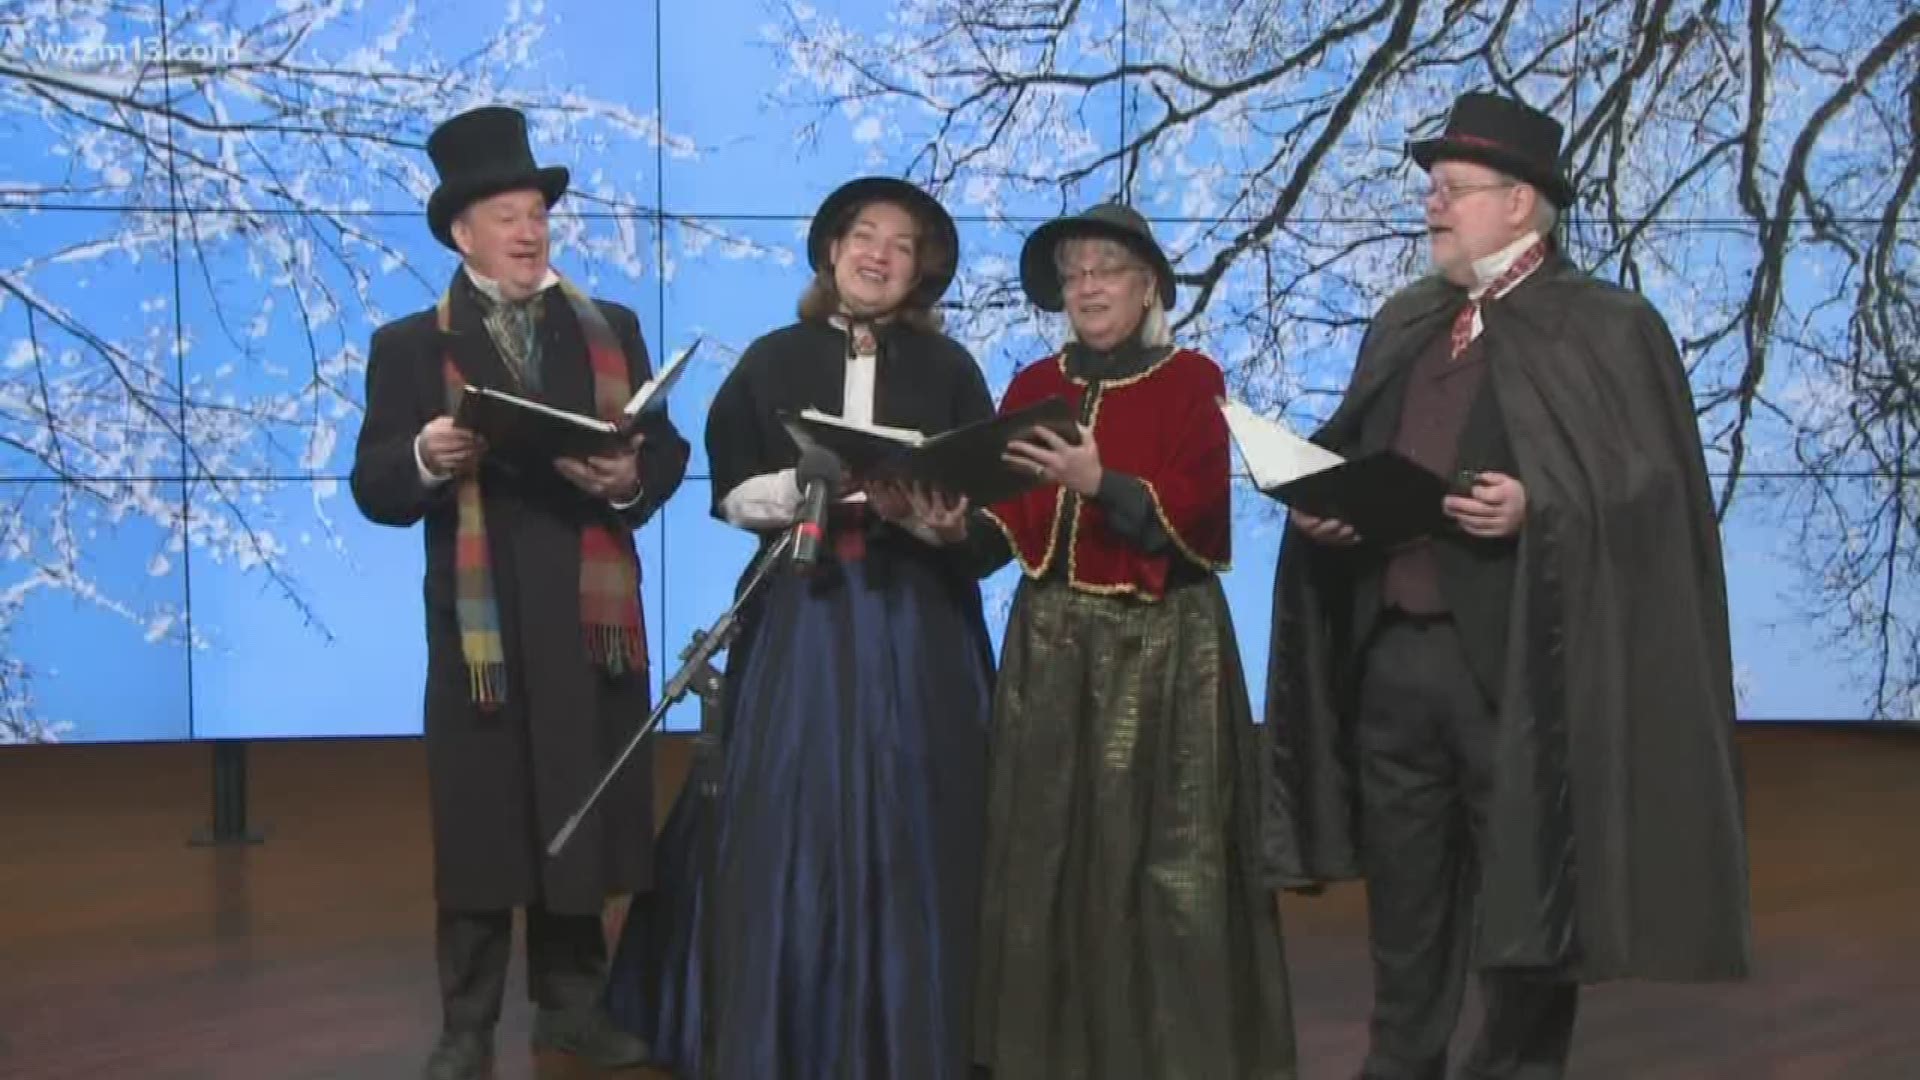 The Original Dickens Carolers visit 13 ON YOUR SIDE